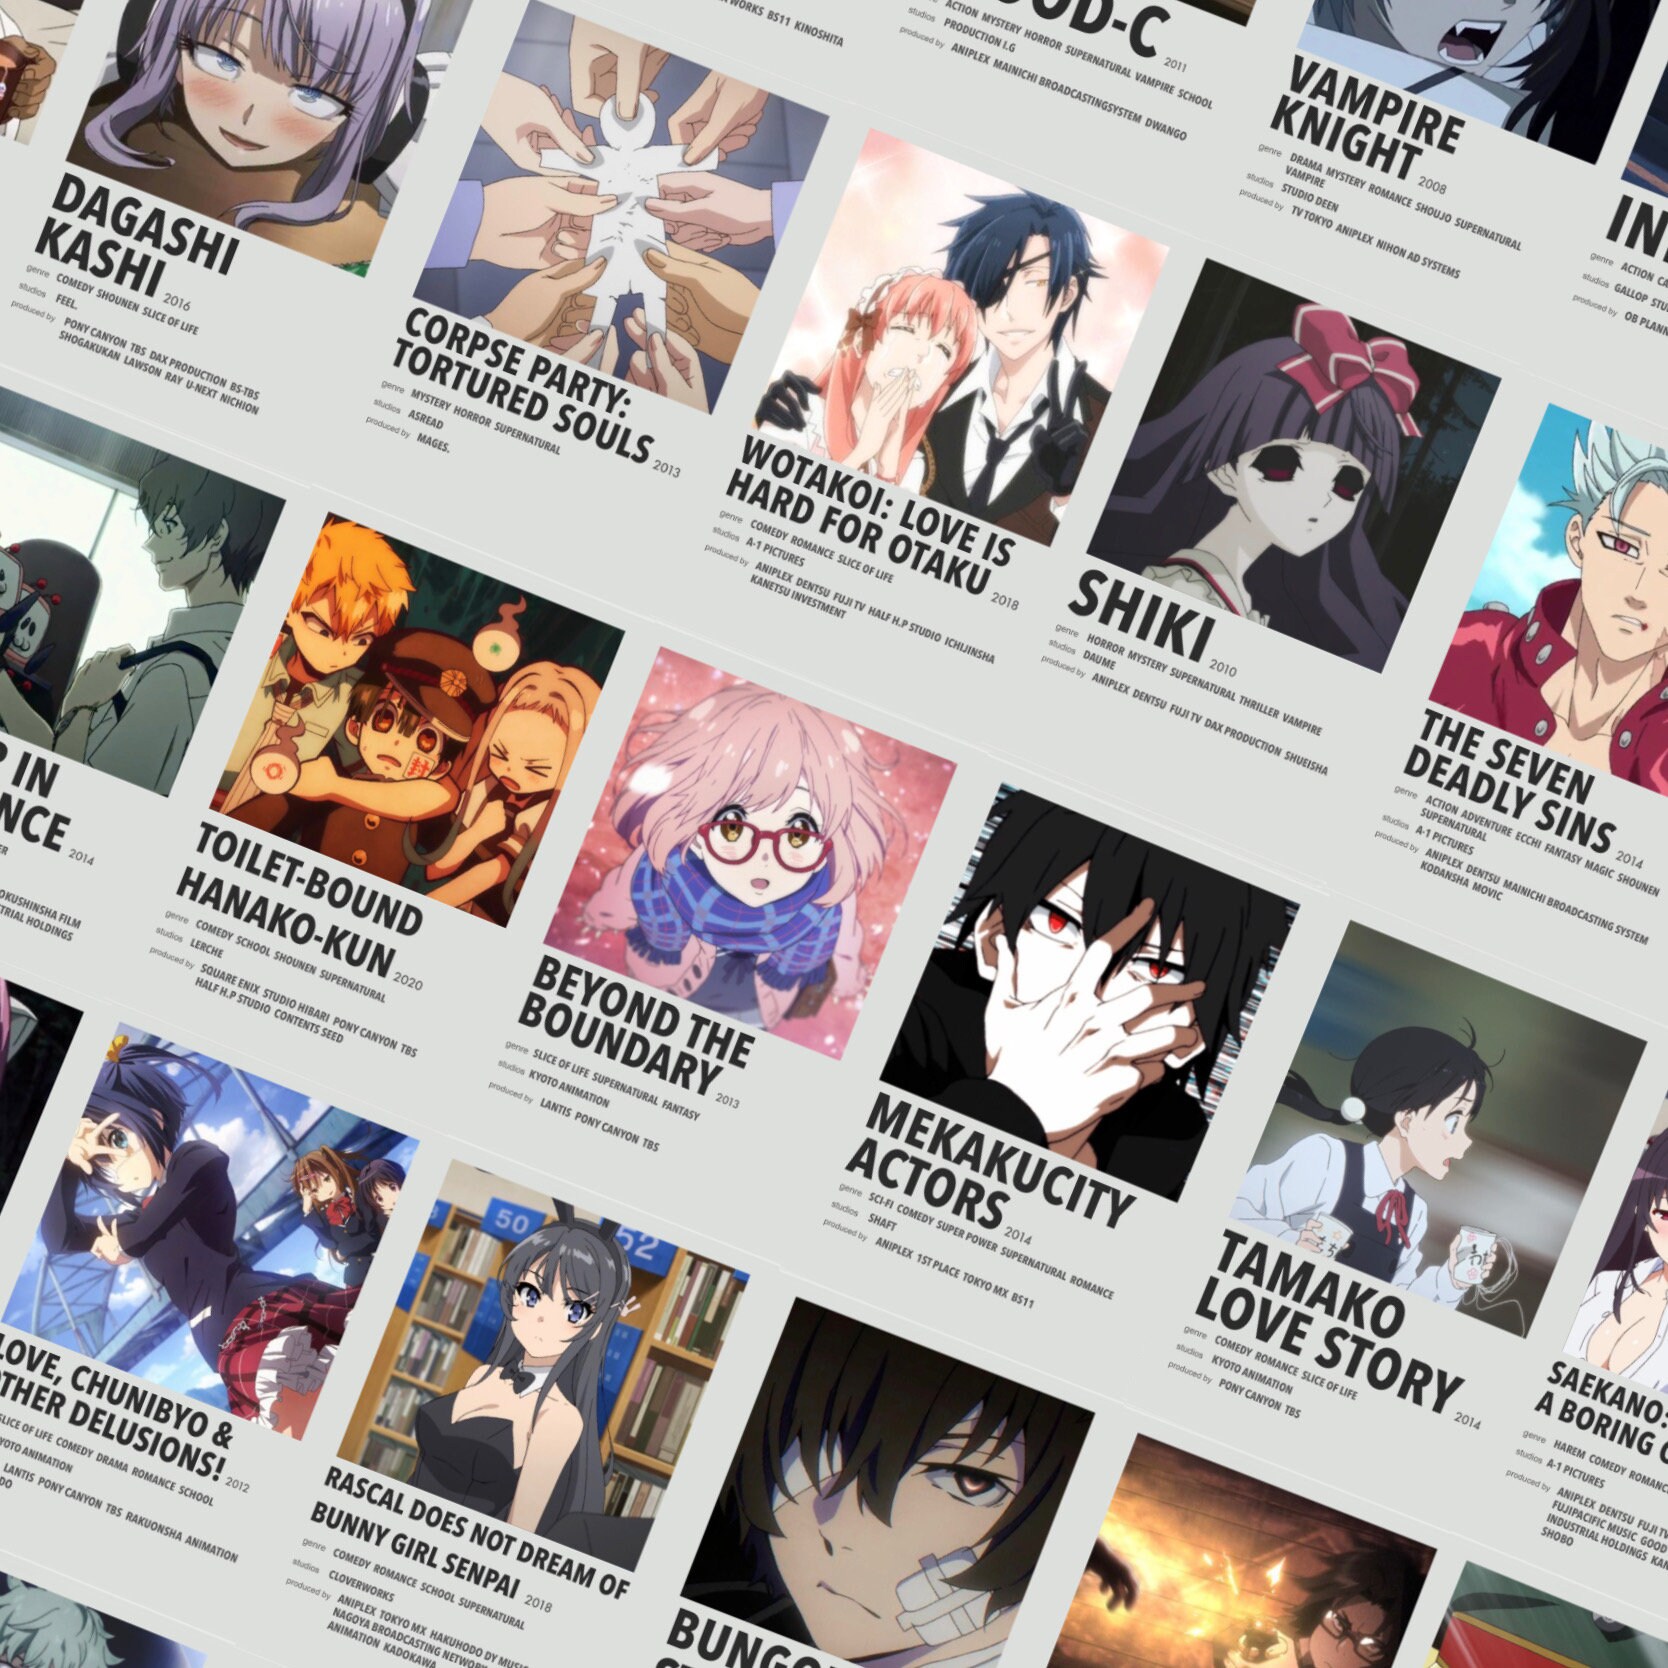 Anime Analysis Posters for Sale